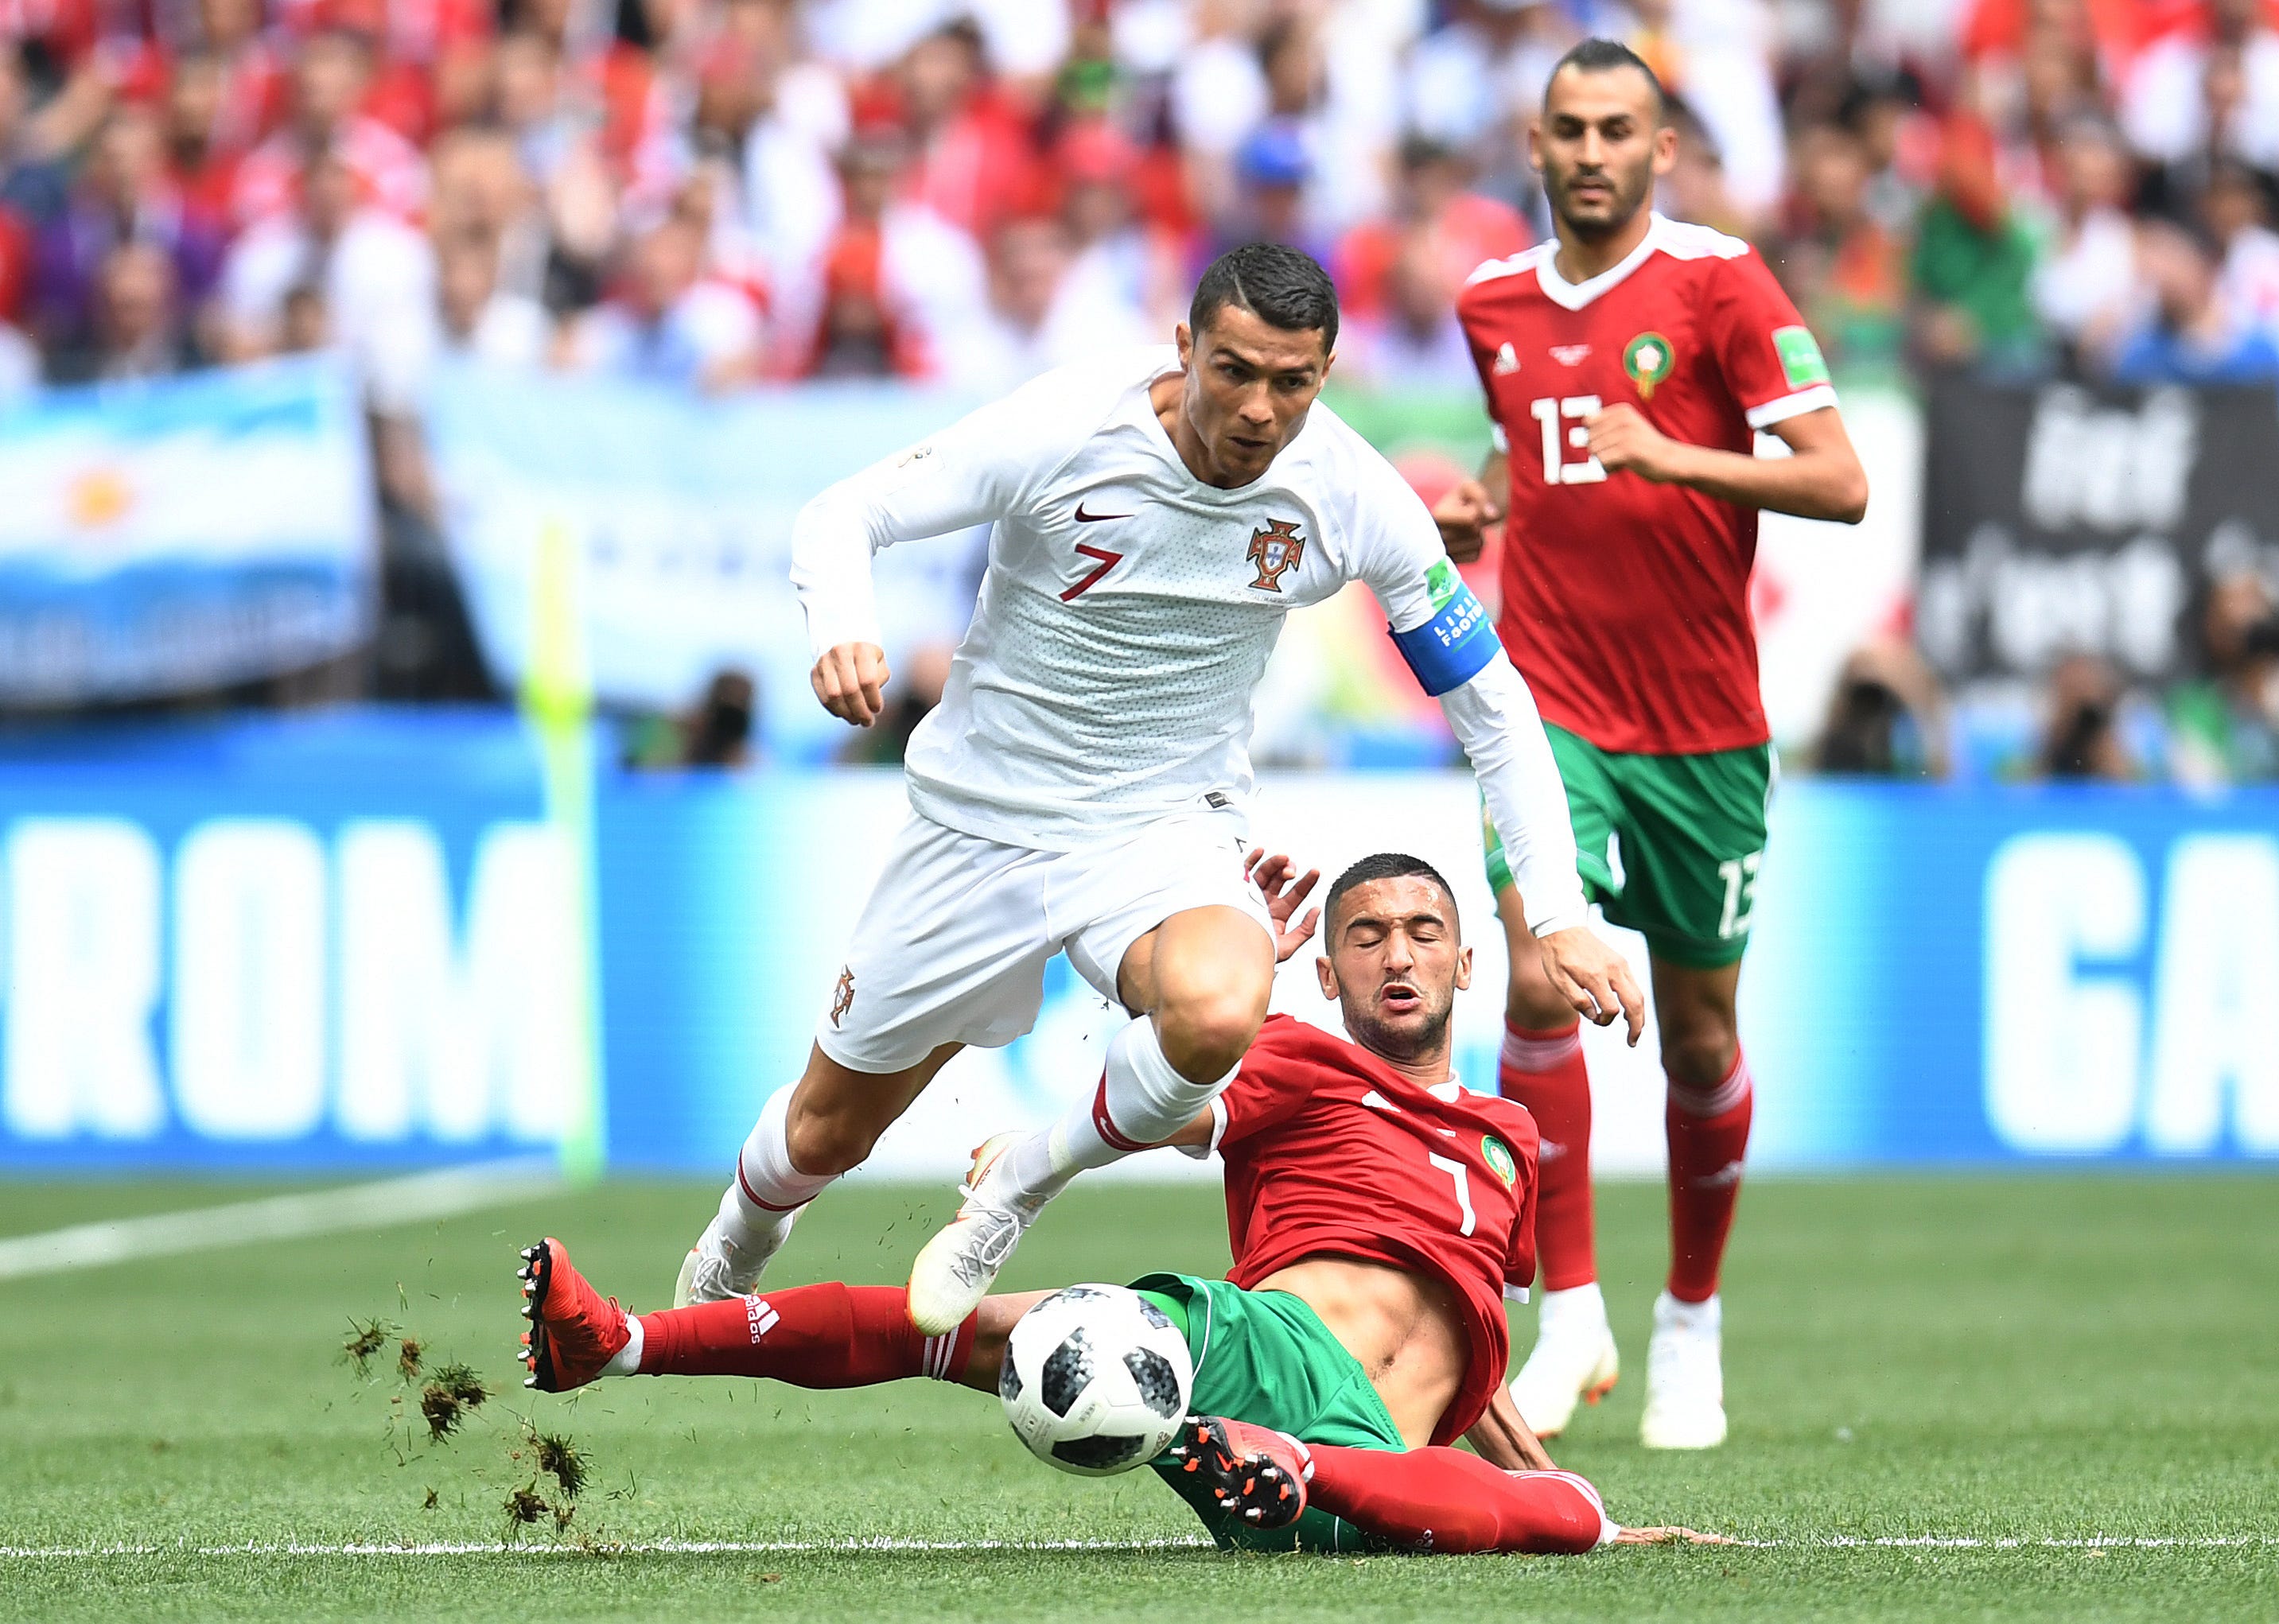 Portuguese forward Cristiano Ronaldo, left, avoids Morocco midfielder Hakim Ziyech in Group D play during the FIFA World Cup 2018 at Spartak Stadium in Moscow.